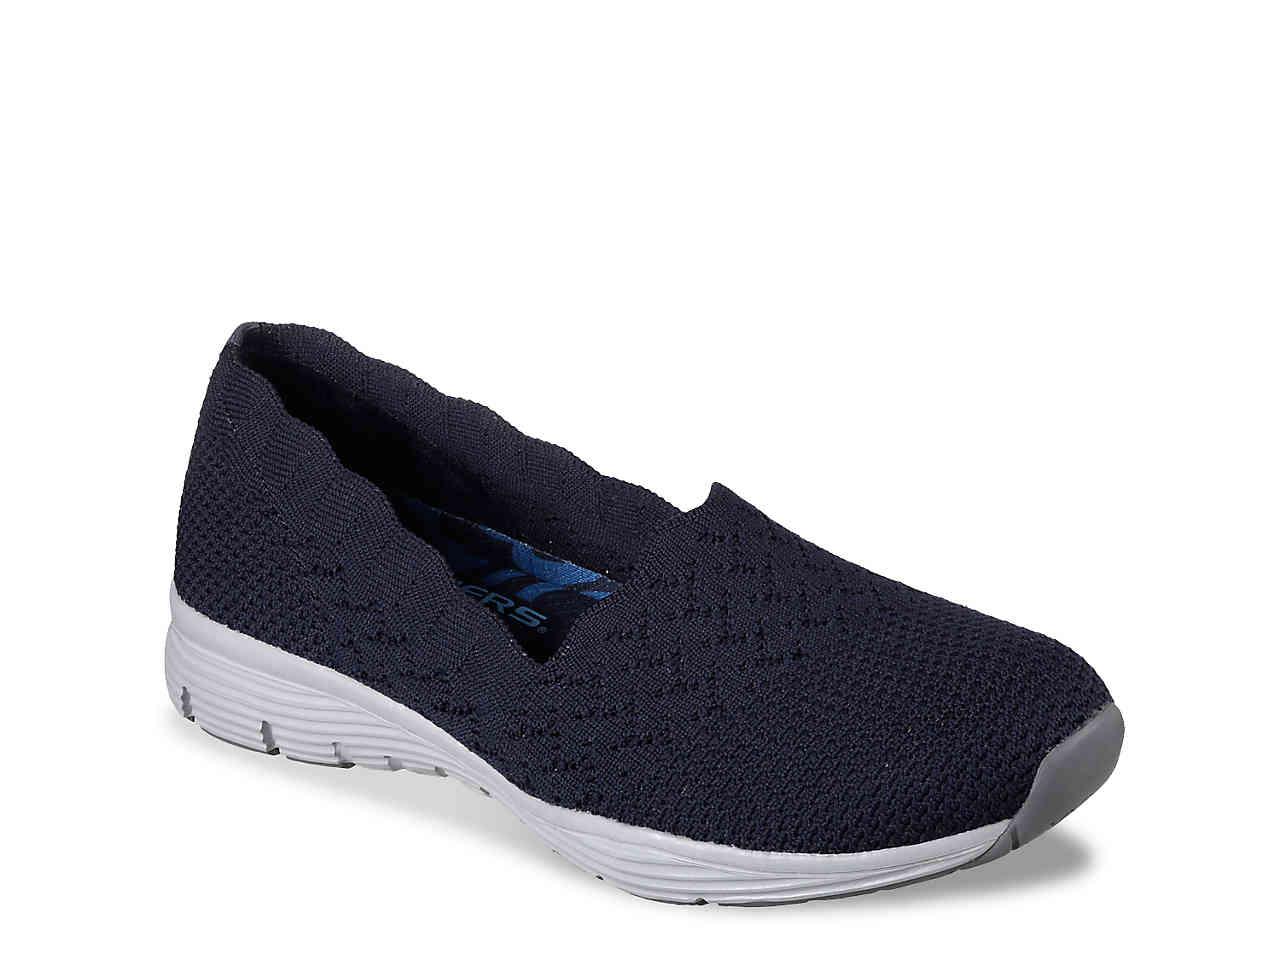 Skechers Synthetic Seager Scallop Slip-on Sneaker in Navy (Blue) - Lyst